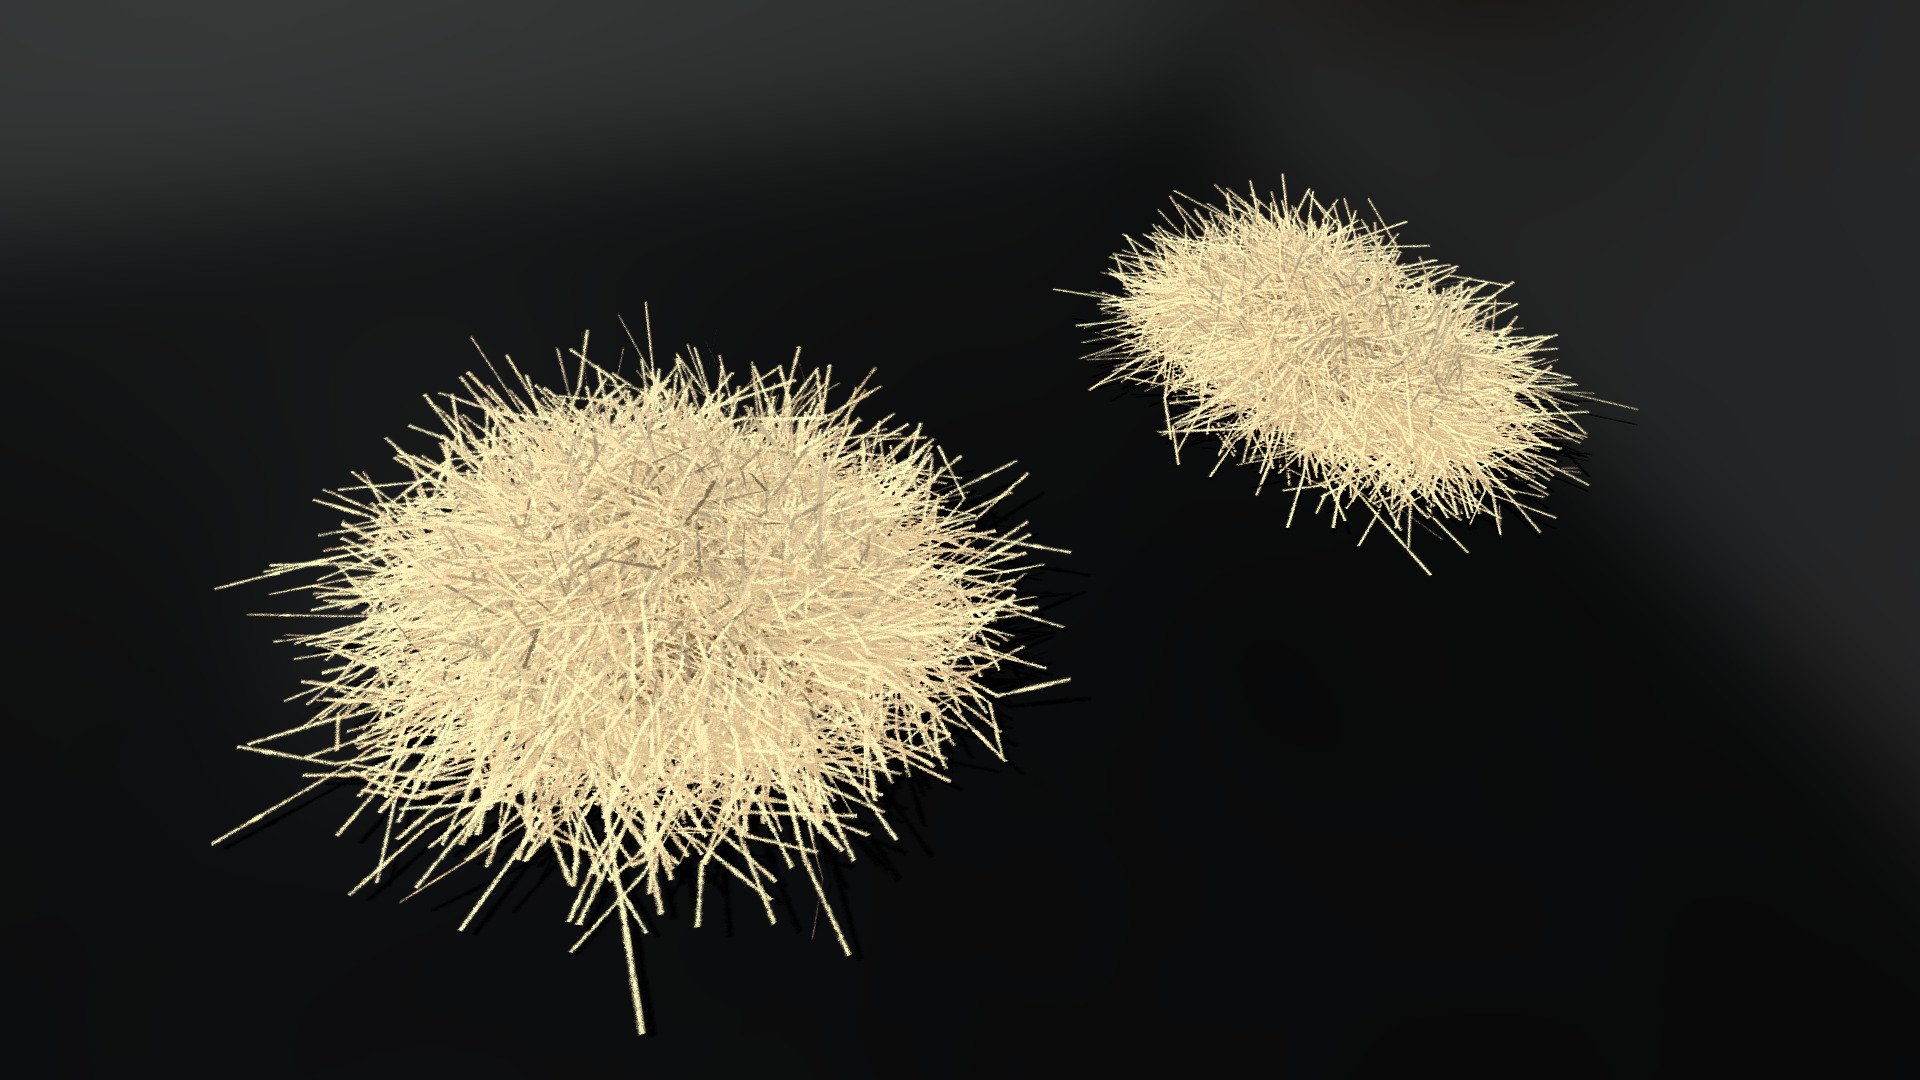 These tiny haystacks are intended for use in games or any other real-time environment. 
These models are also included in a larger pack, which contains multiple haystacks and hay bales.

Both models are game-ready but relatively high-poly. 
They are intended to be used with performance-enhancing game engine techniques such as auto LODs, distance culling, etc.

4k .tga textures are included in the download:




BaseColor.tga

Normal.tga

ORM.tga (This is a packed texture, where the RGB channels each contain different texture maps)
Red Channel = Ambient Occlusion - Green Channel = Roughness - Blue Channel = Metallic

Model + Textures by: David Falke

Website: https://www.grip420.com/

Discord: Follow us on Discord

Facebook Follow us on Facebook - Haystacks Tiny - GameReady - Buy Royalty Free 3D model by GRIP420 3d model